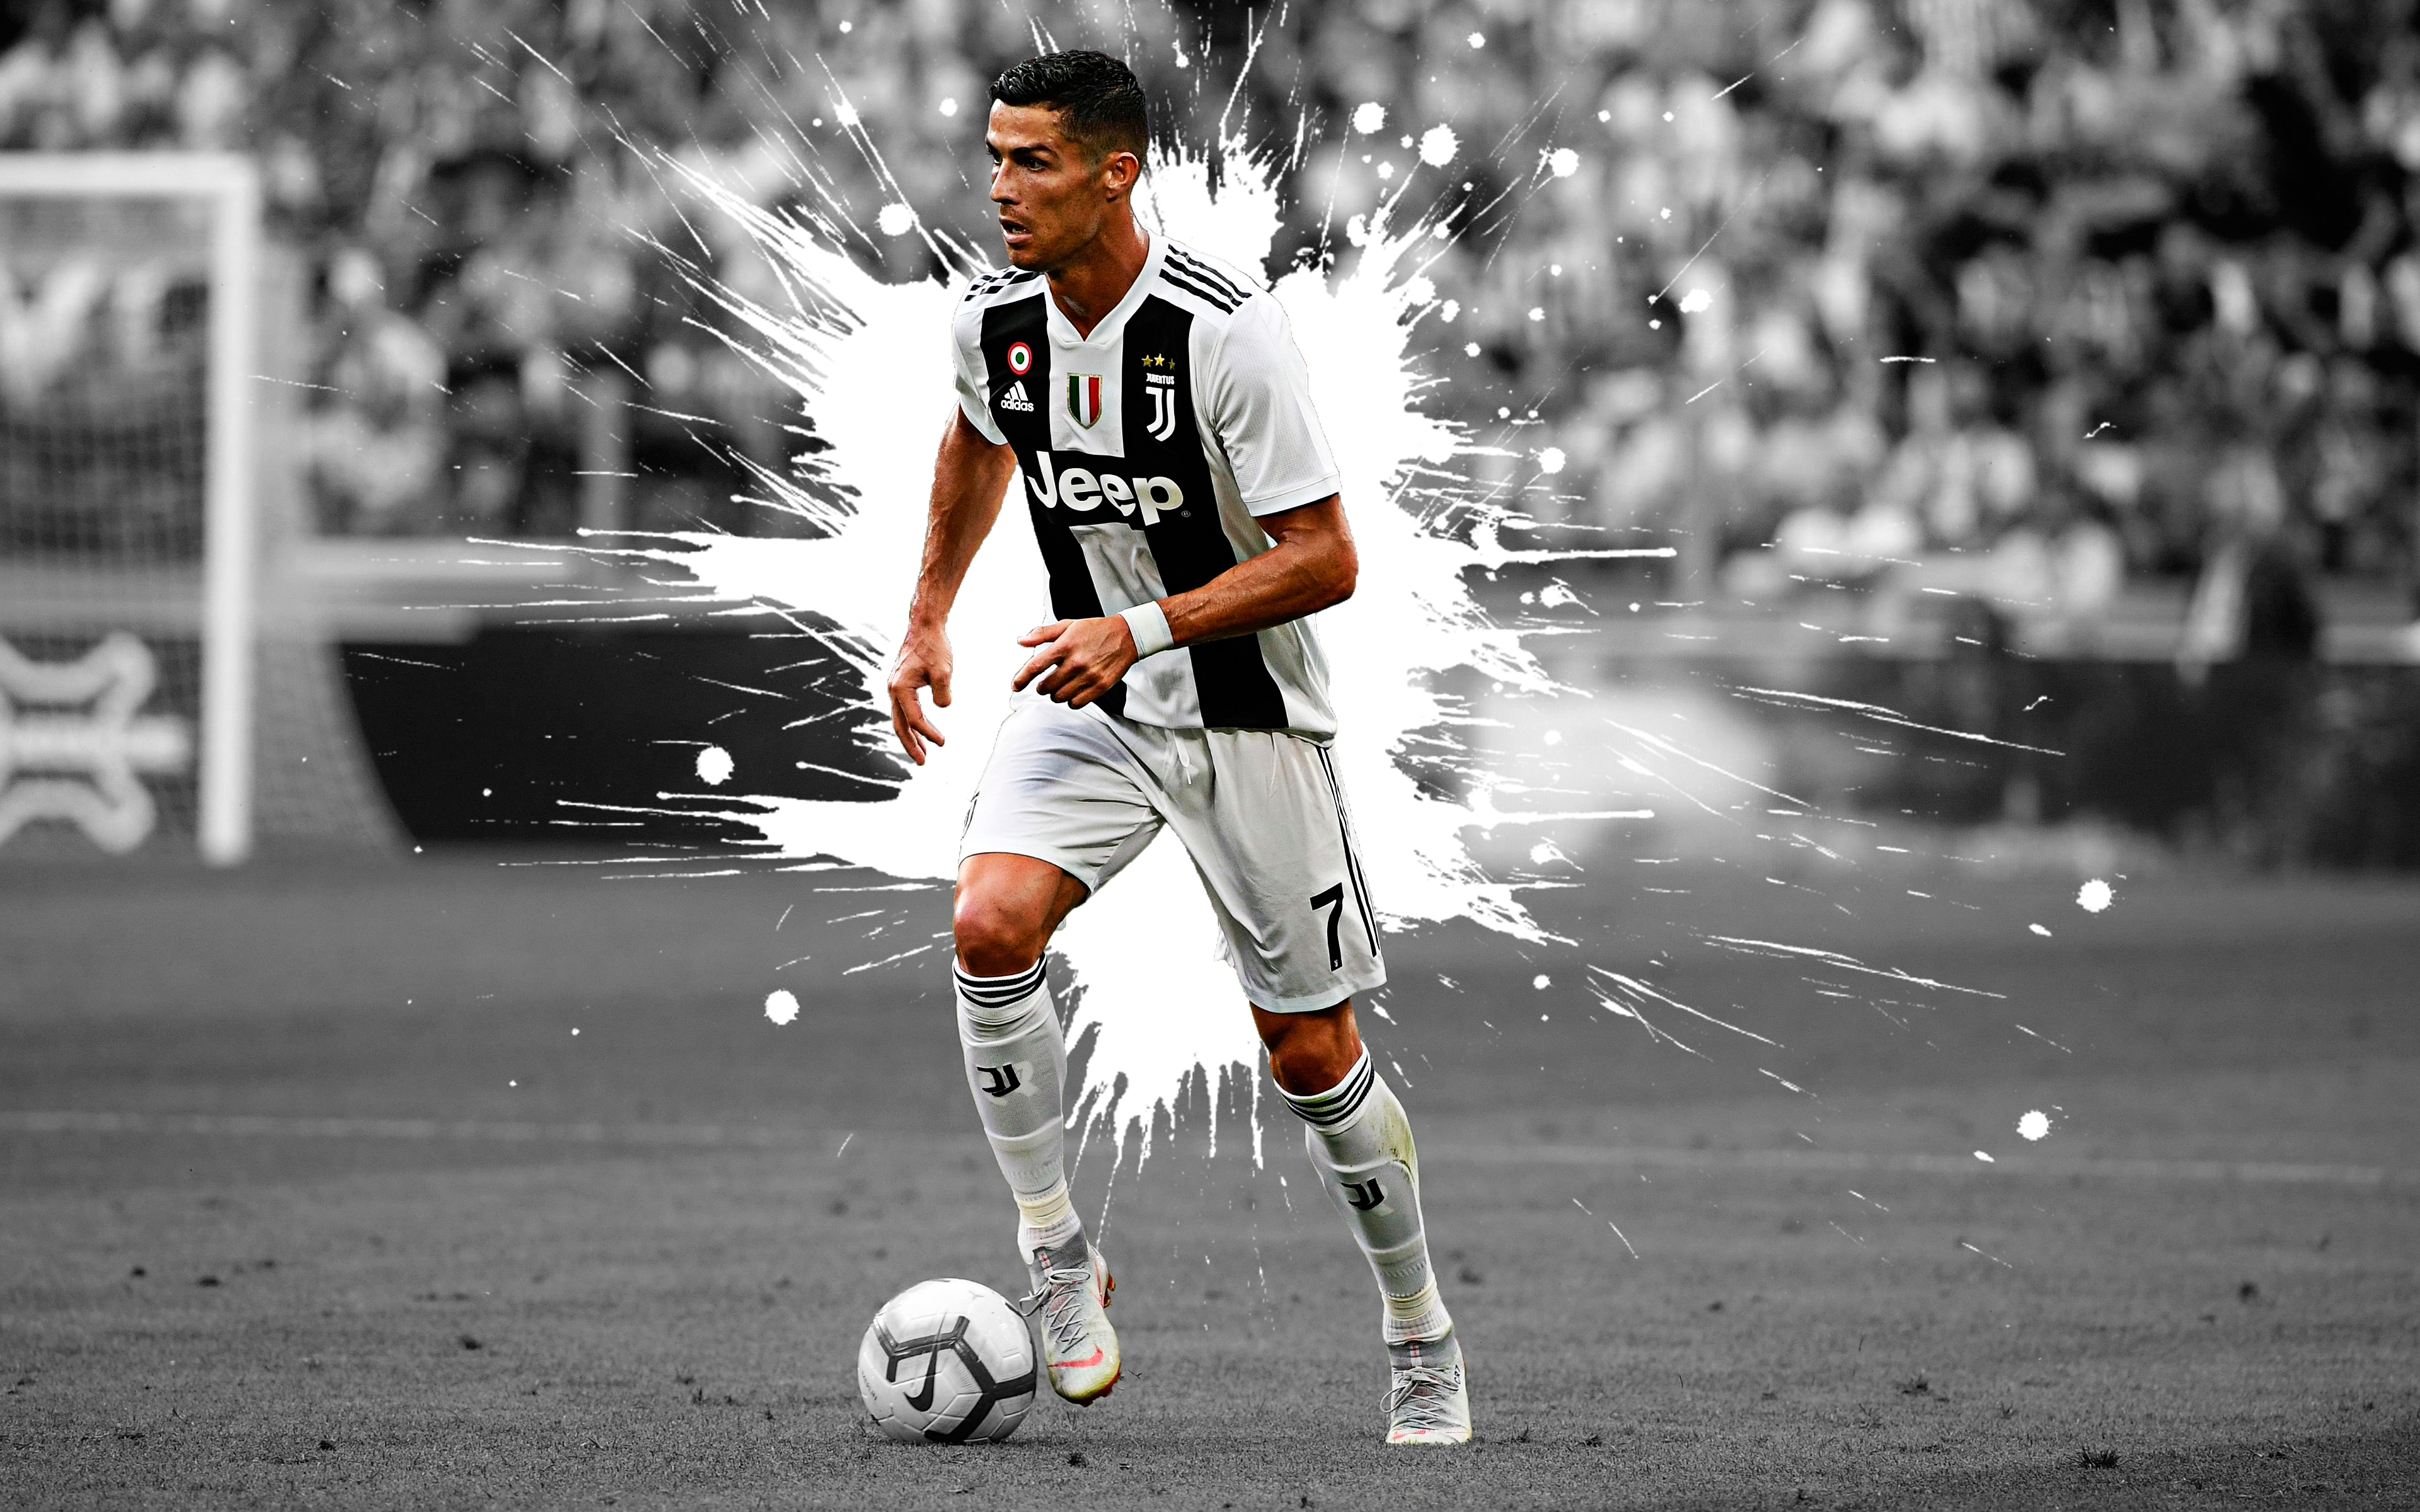 Download Ronaldo Wallpaper For Mobile On Itl.cat